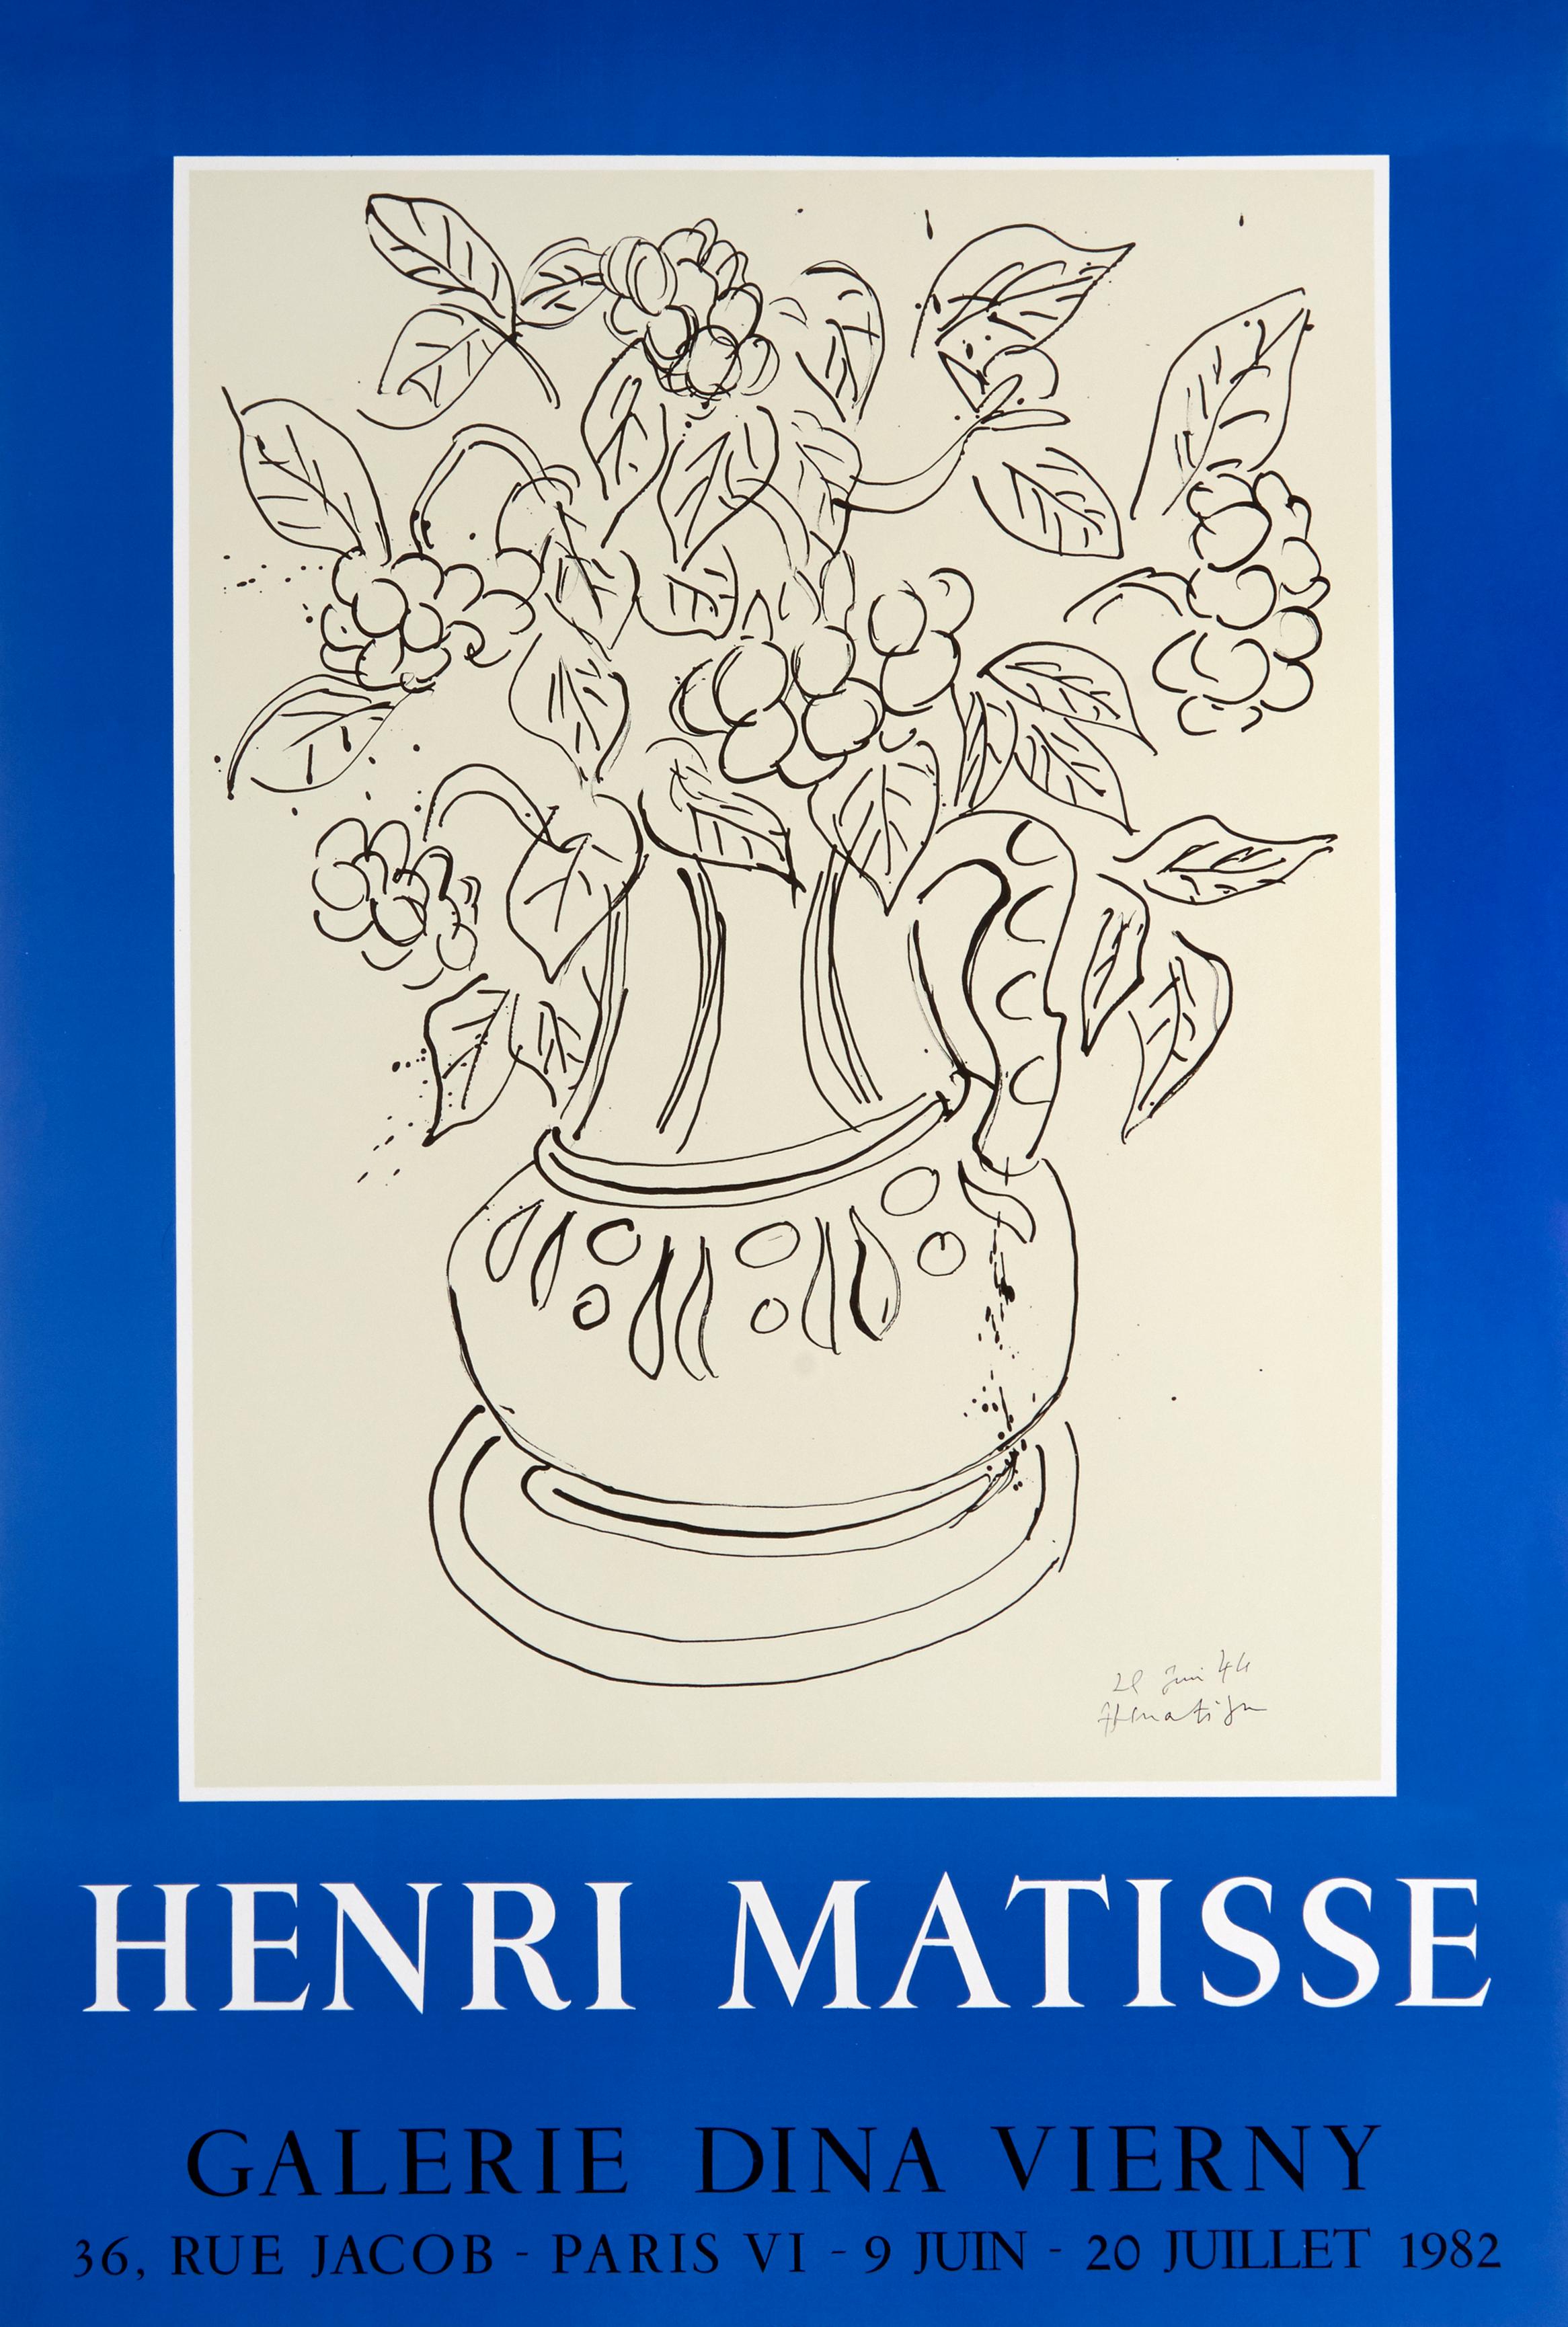 Galerie Dina Vierny by Henri Matisse lithographic poster